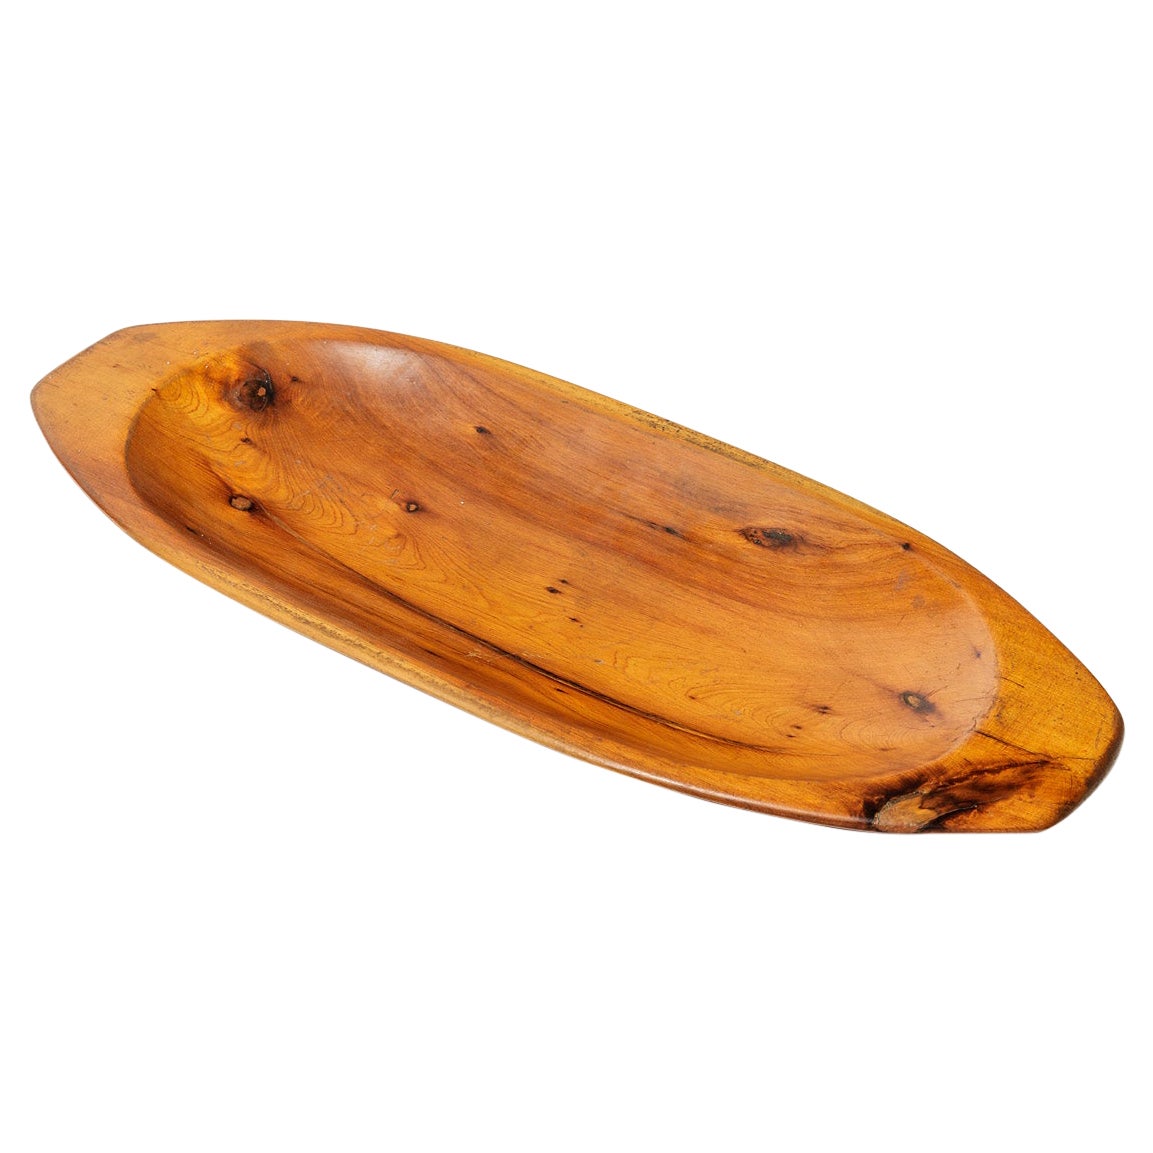 Olive Wood Sculptural Plate or Dish circa 1950 French Design Bowl For Sale